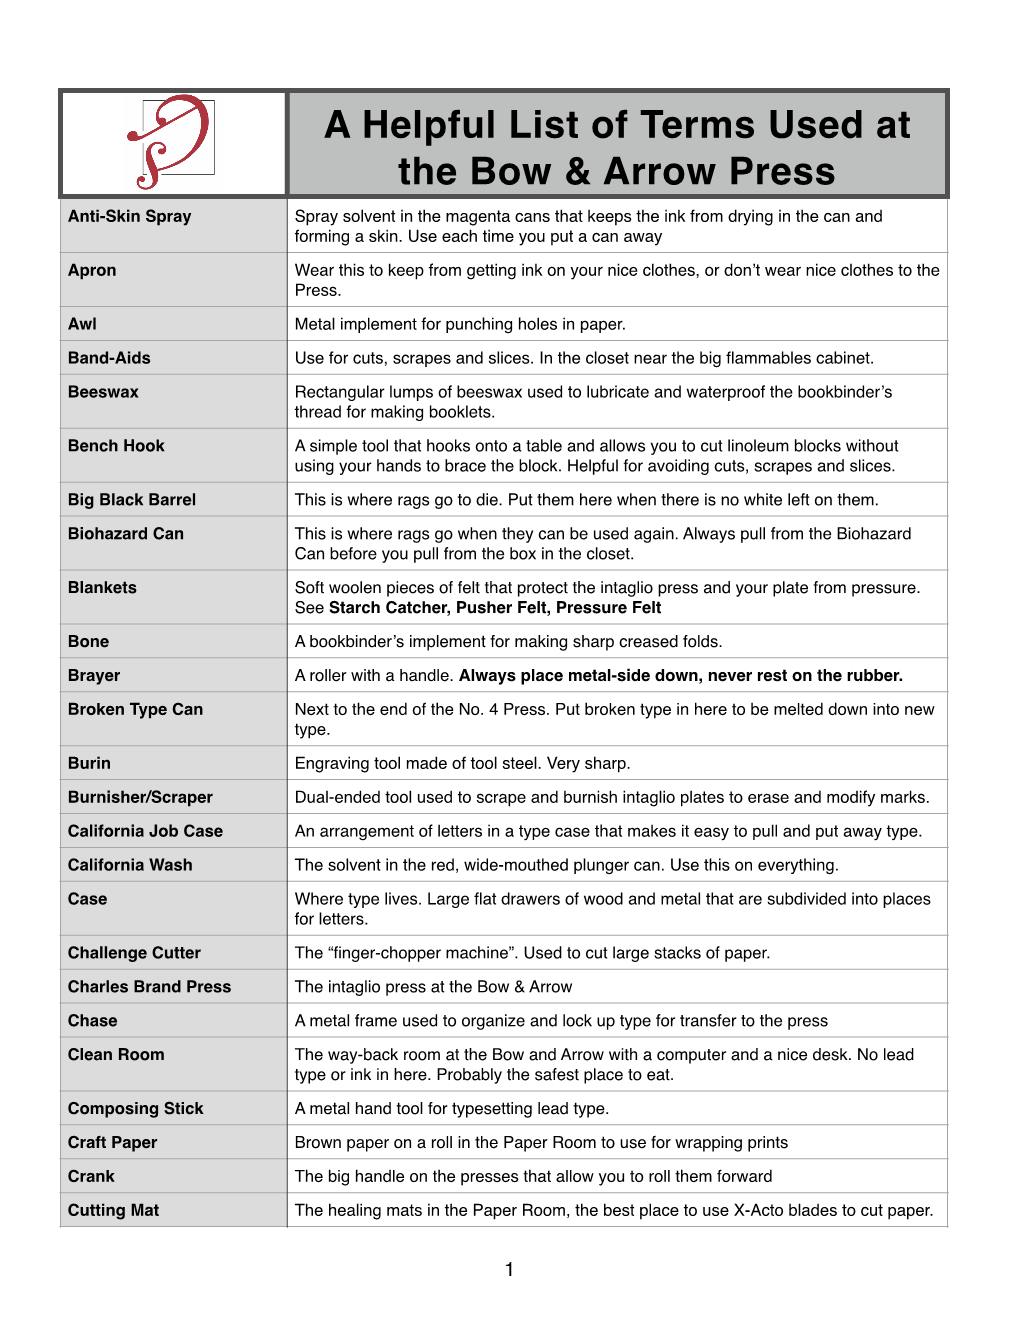 Press Glossary.Numbers